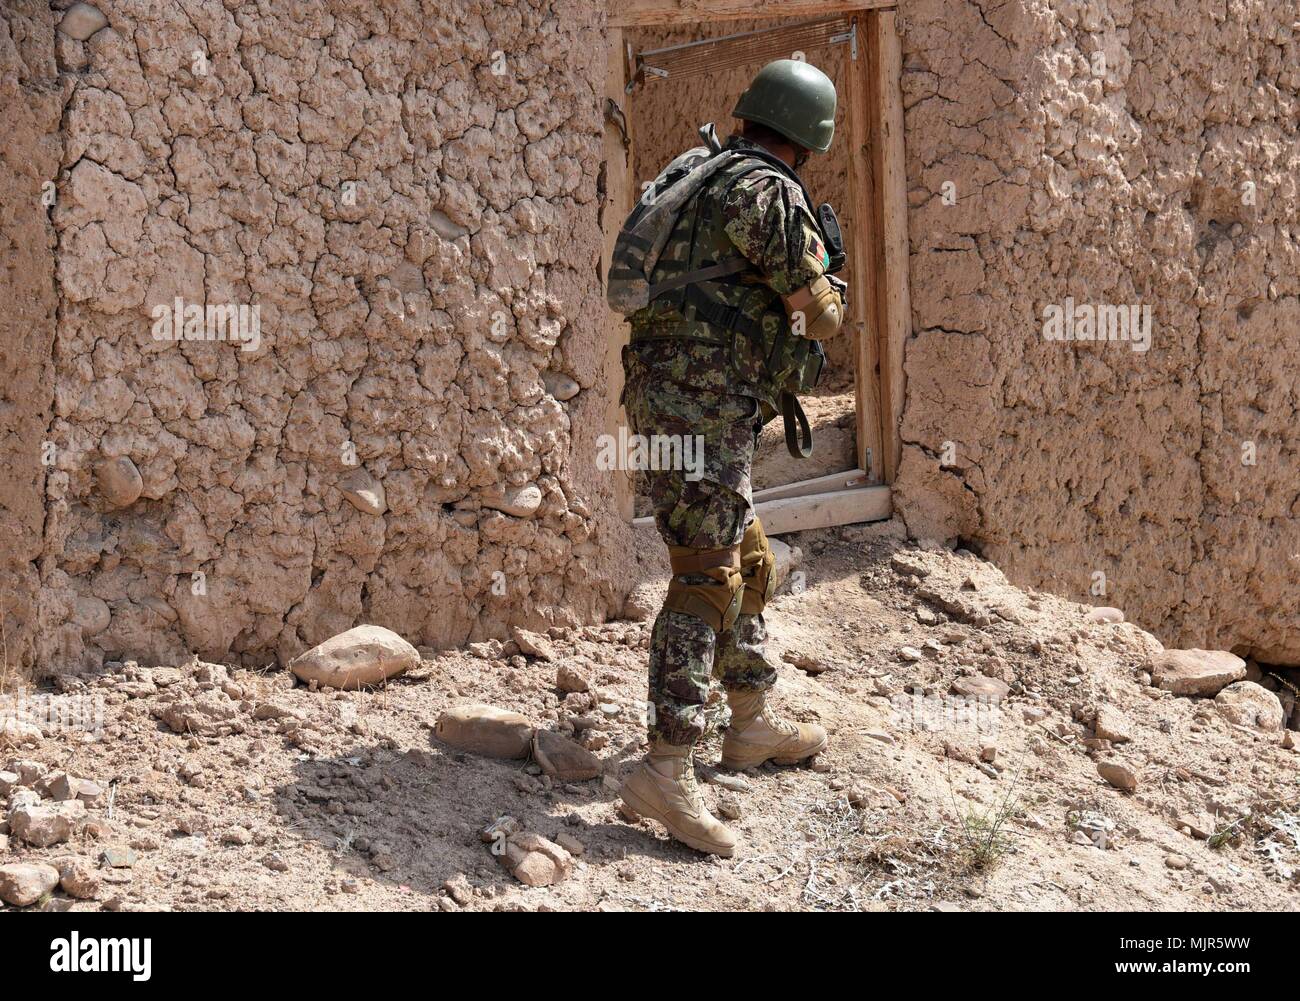 Tirin Kot, Afghanistan. 5th May, 2018. An Afghan security force member takes part in a military operation in Tirin Kot, capital of Uruzgan province, Afghanistan, May 5, 2018. Credit: Sanaullah Seiam/Xinhua/Alamy Live News Stock Photo